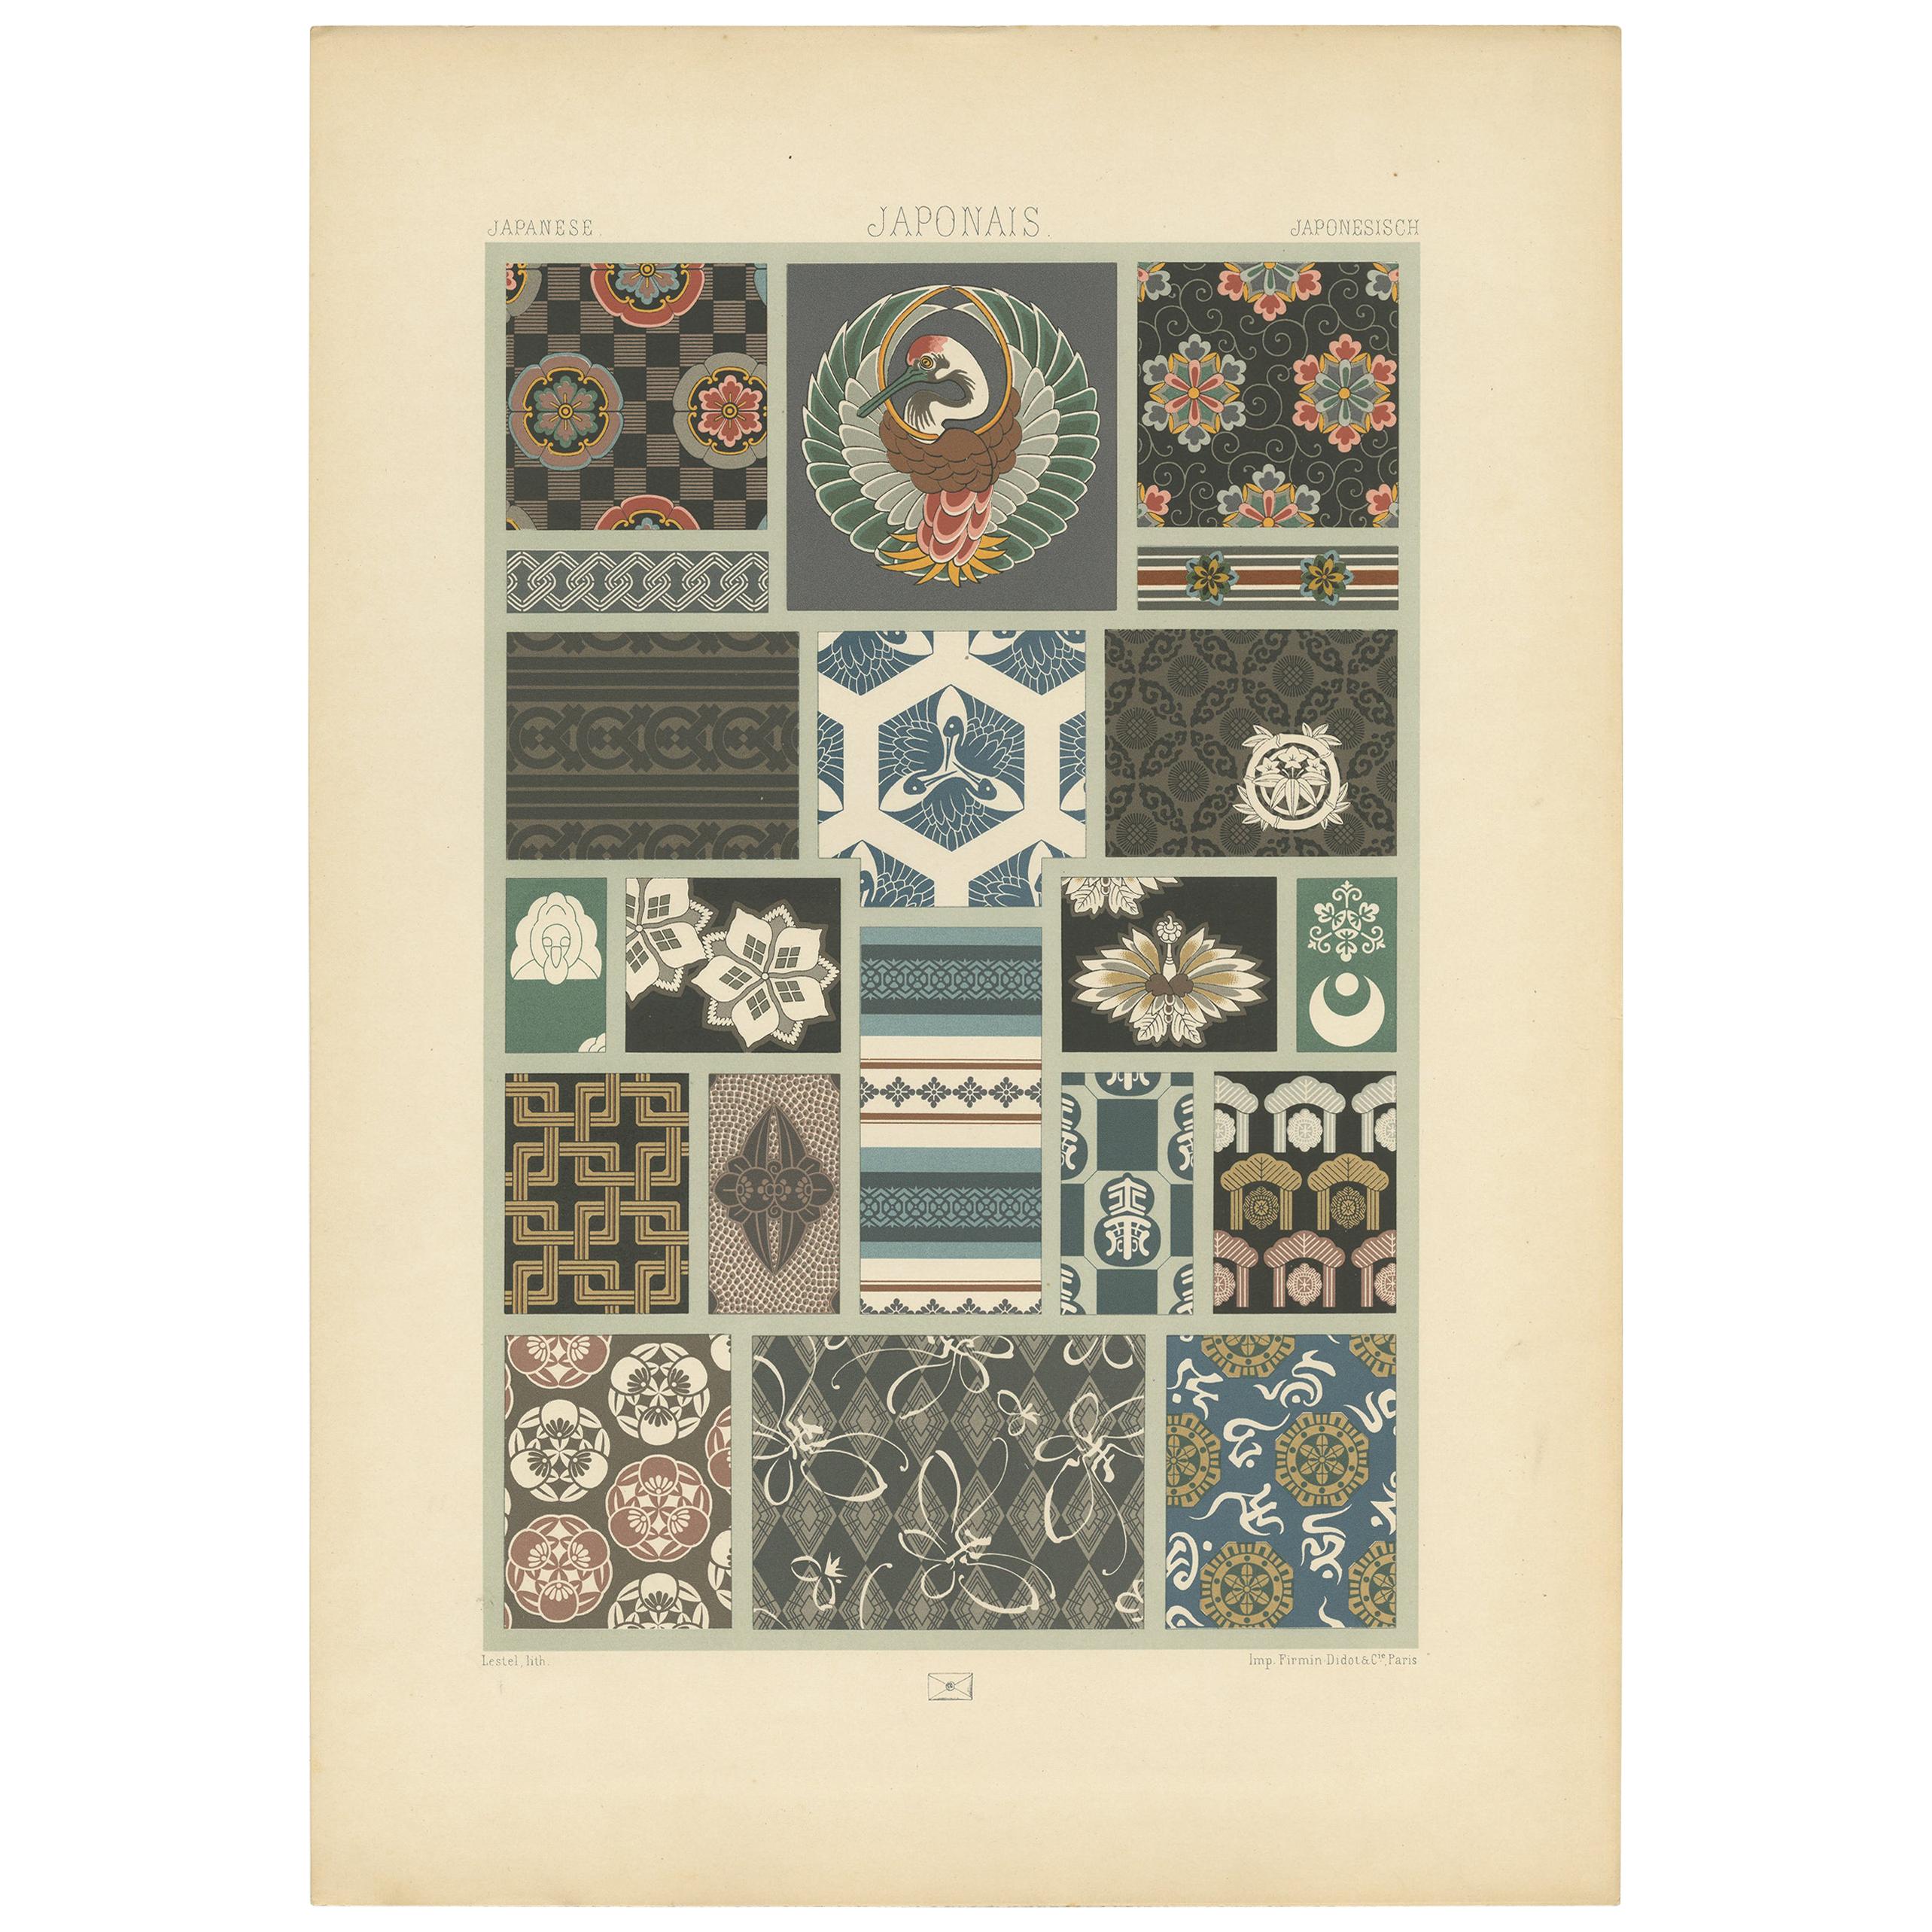 Pl. 16 Antique Print of Japanese Motifs from Textiles by Racinet, 'circa 1890'